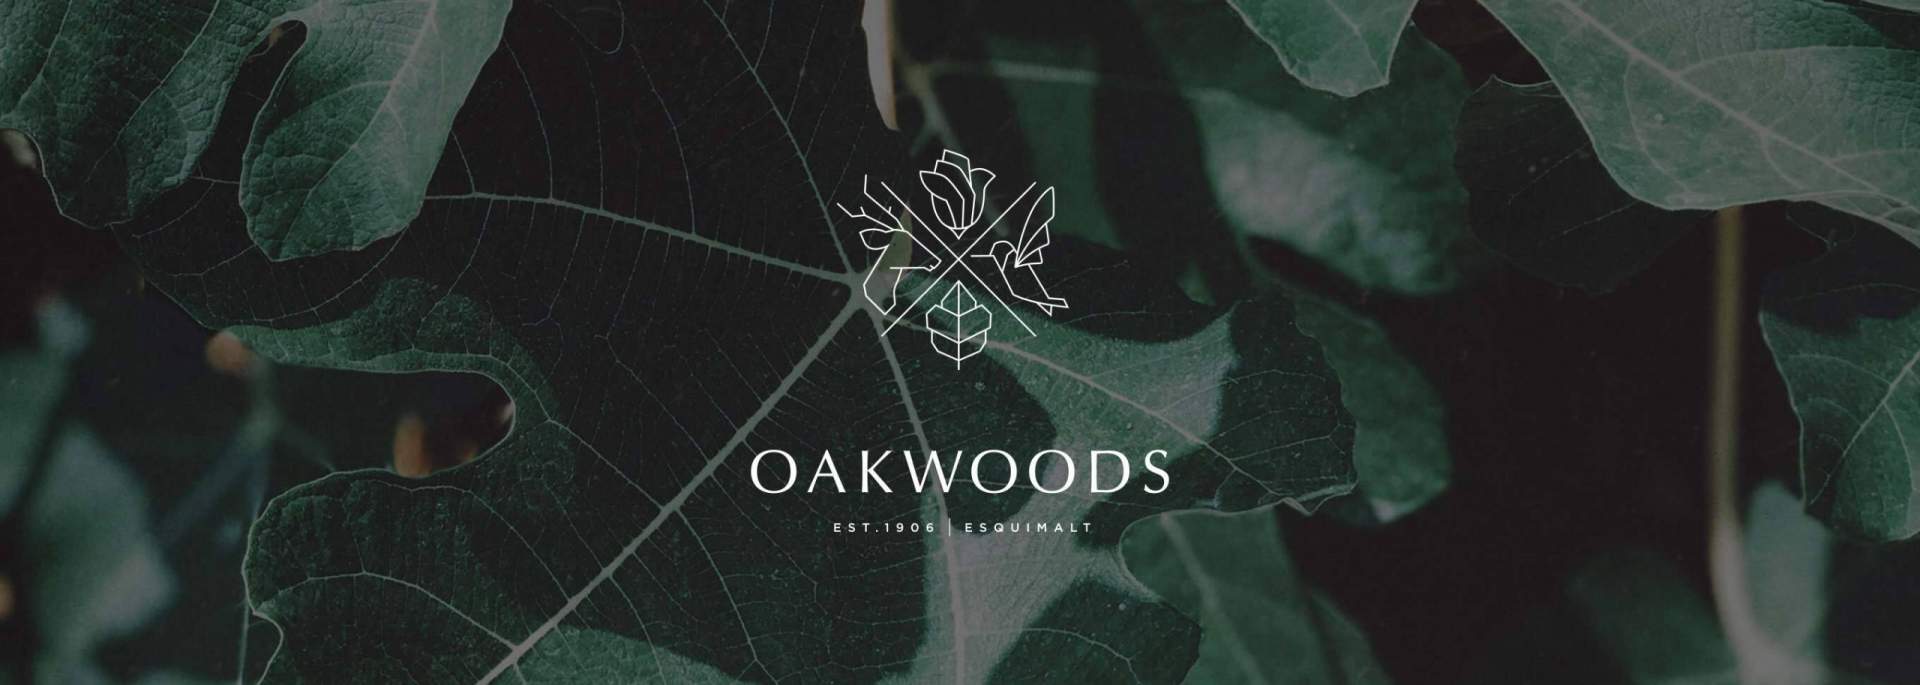 Oakwoods by Aragon – Prices, Availability, Plans